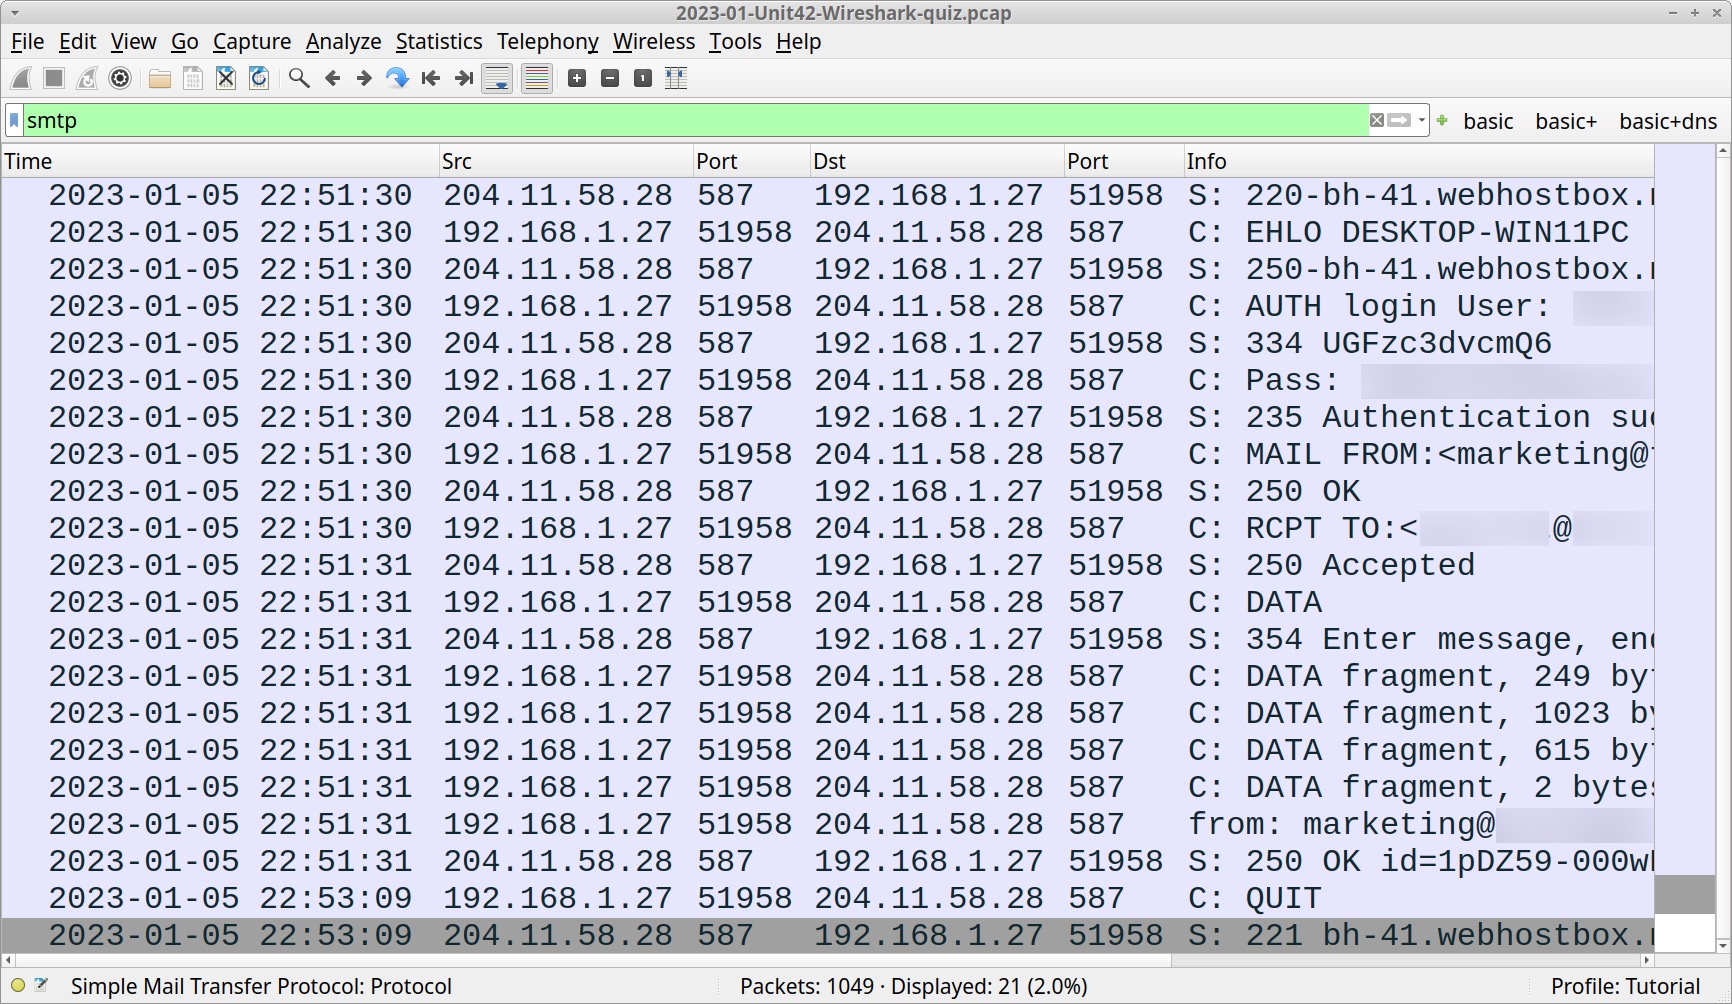 Image 4 is a screenshot of the Wireshark program. This shows the SMTP traffic from the cpap. 